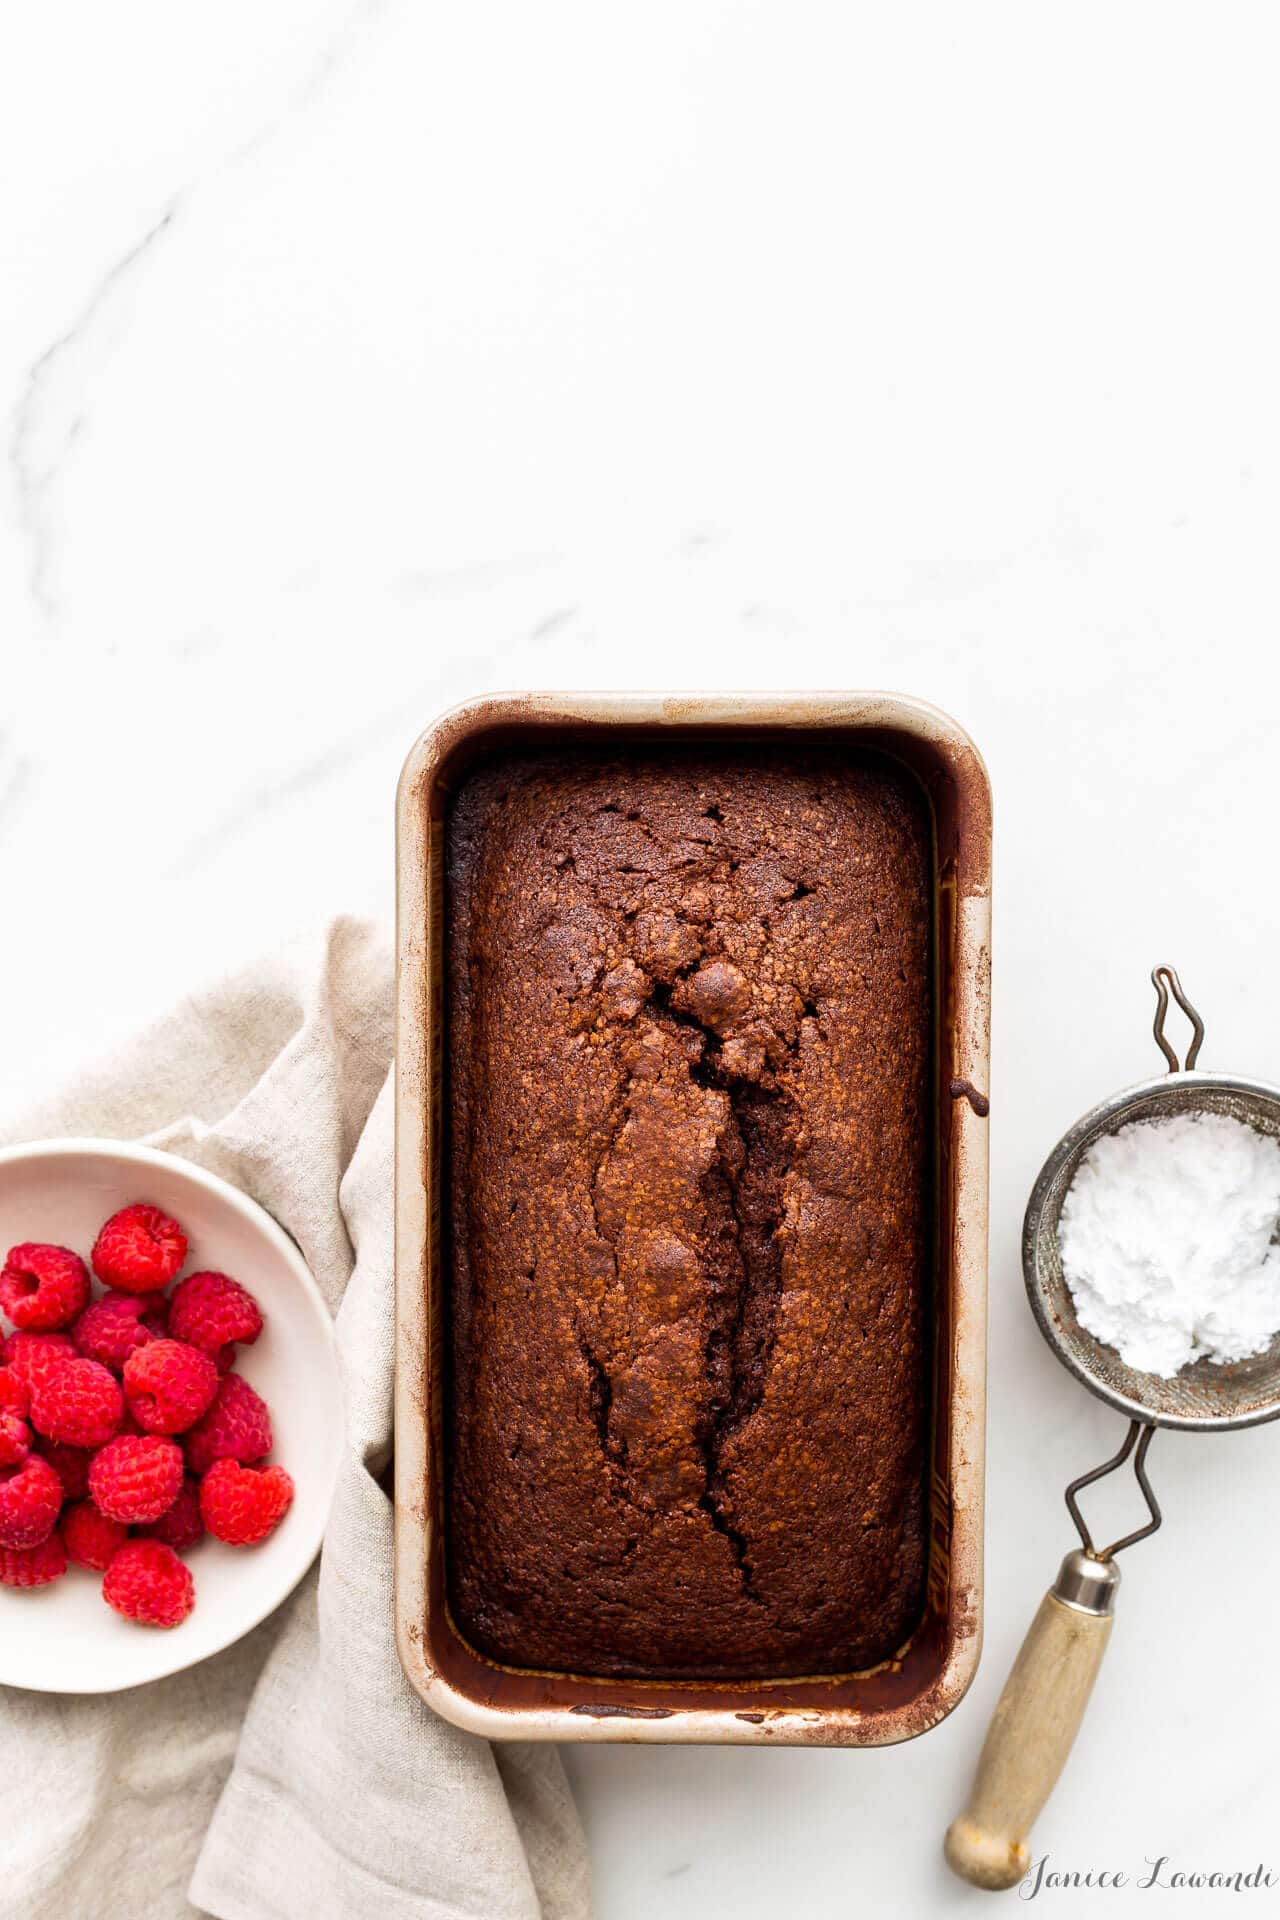 Chocolate pound cake baked in a loaf cake pan, dusted with powdered sugar using a mini strainer and served with a bowl of fresh raspberries